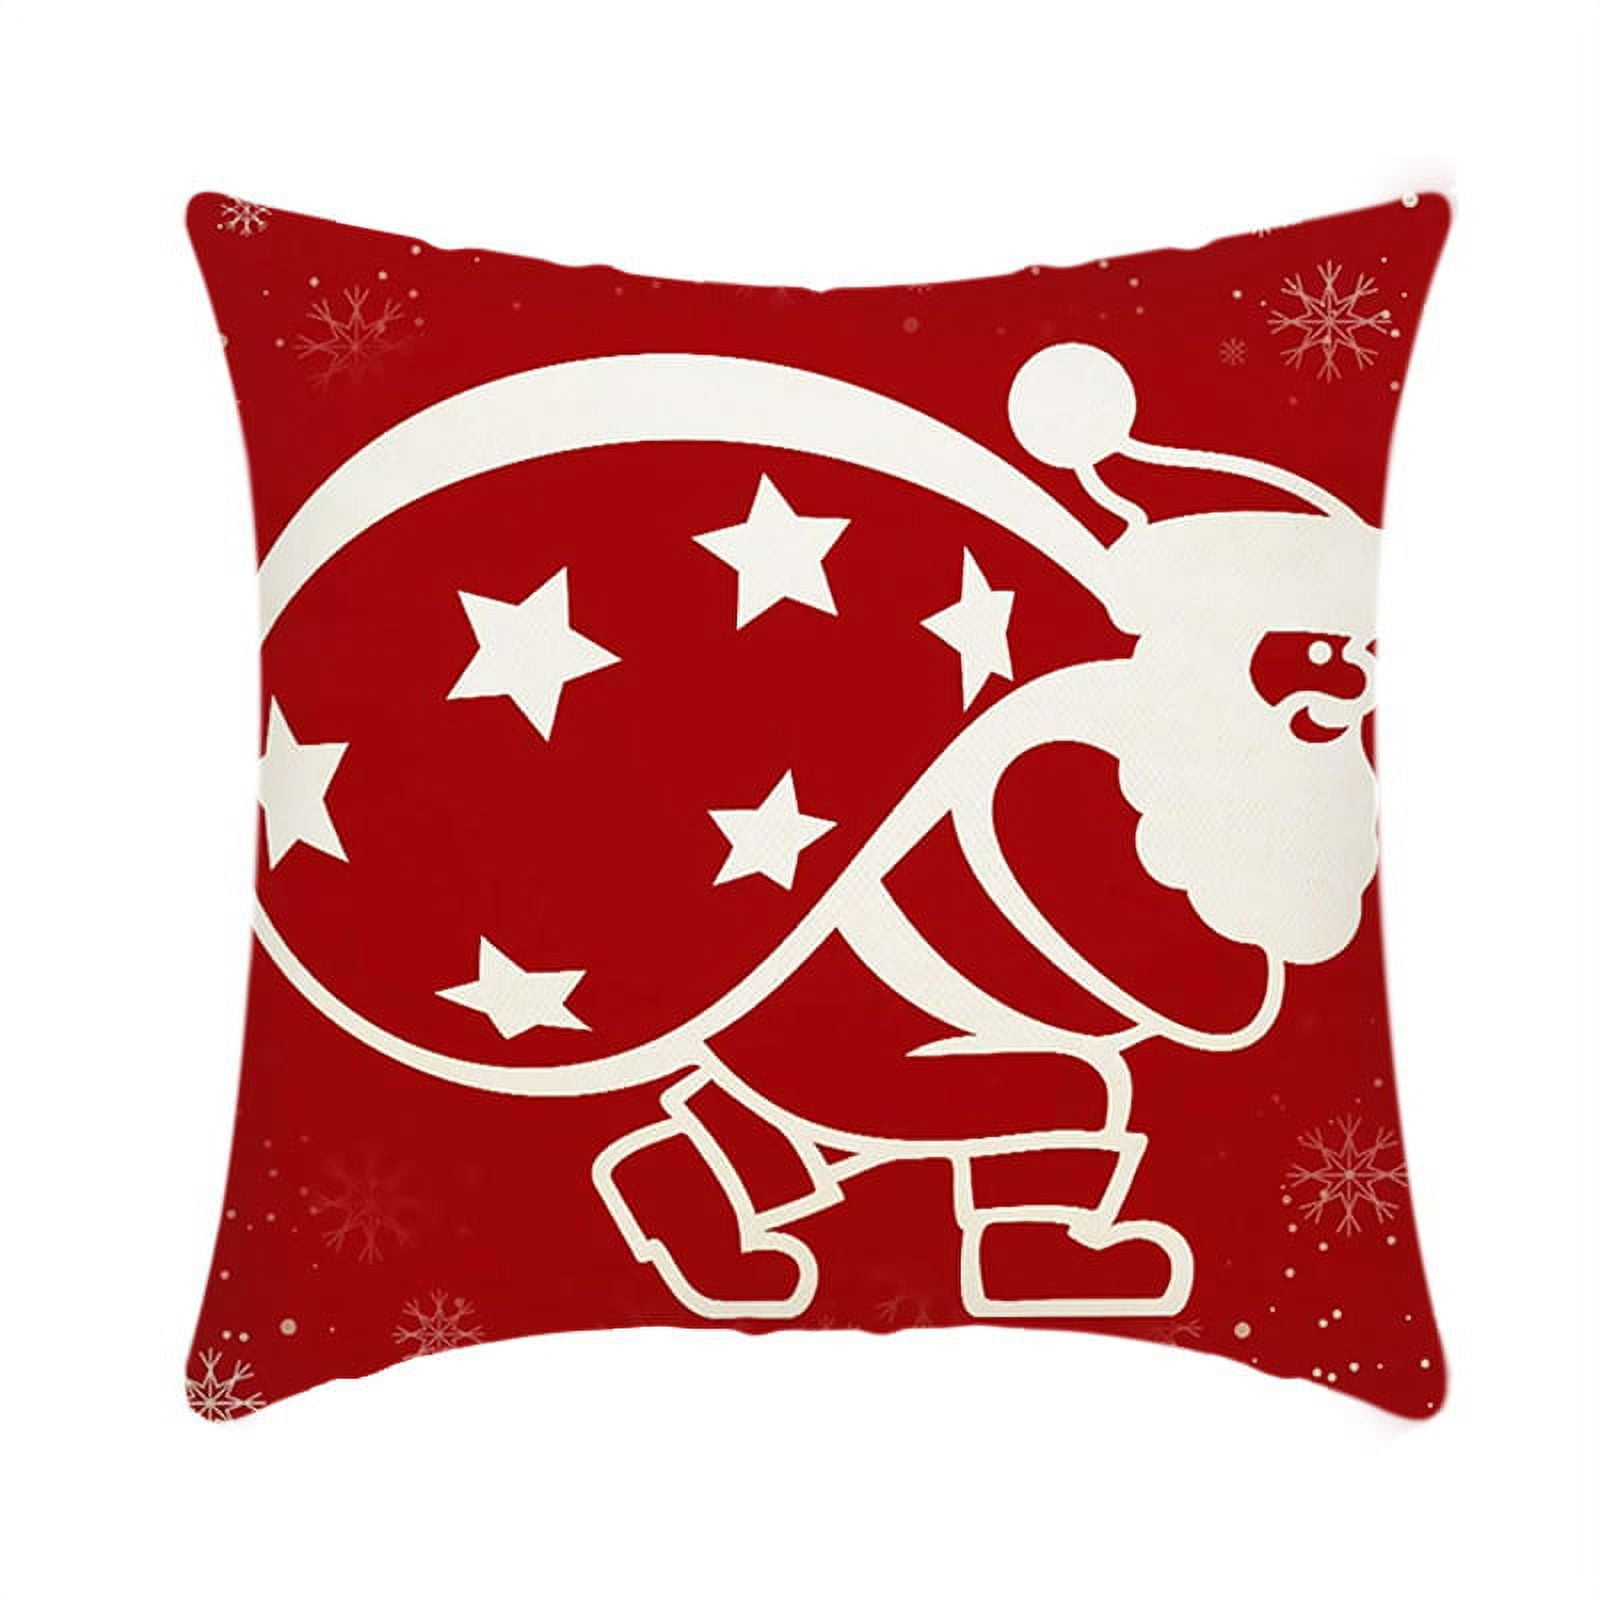 Christmas Snowflake Throw Pillow Covers 18x18 Red Decor Pillowcases Outdoor  Embroidered Cushion For Farmhouse Sofa Office Bed 2pcs